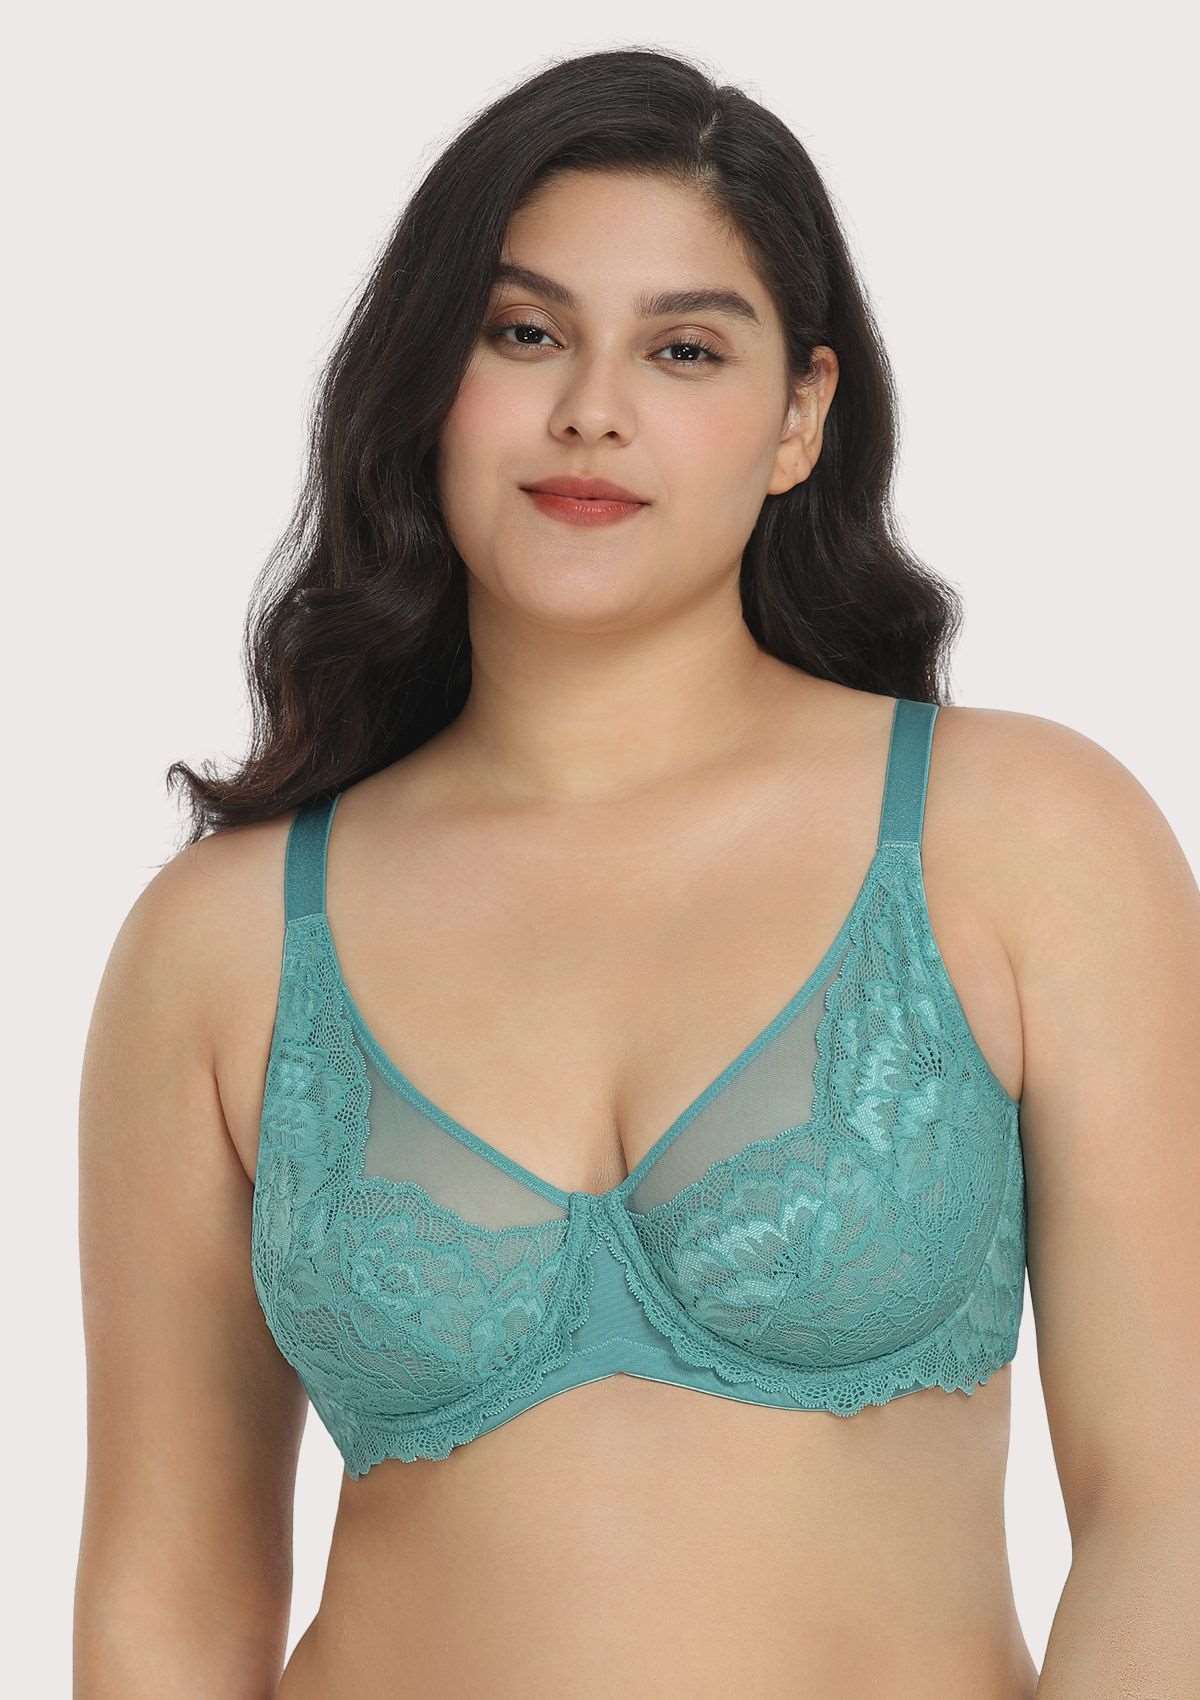 HSIA Paeonia Lace Full Coverage Underwire Non-Padded Uplifting Bra - Light Coral / 38 / C